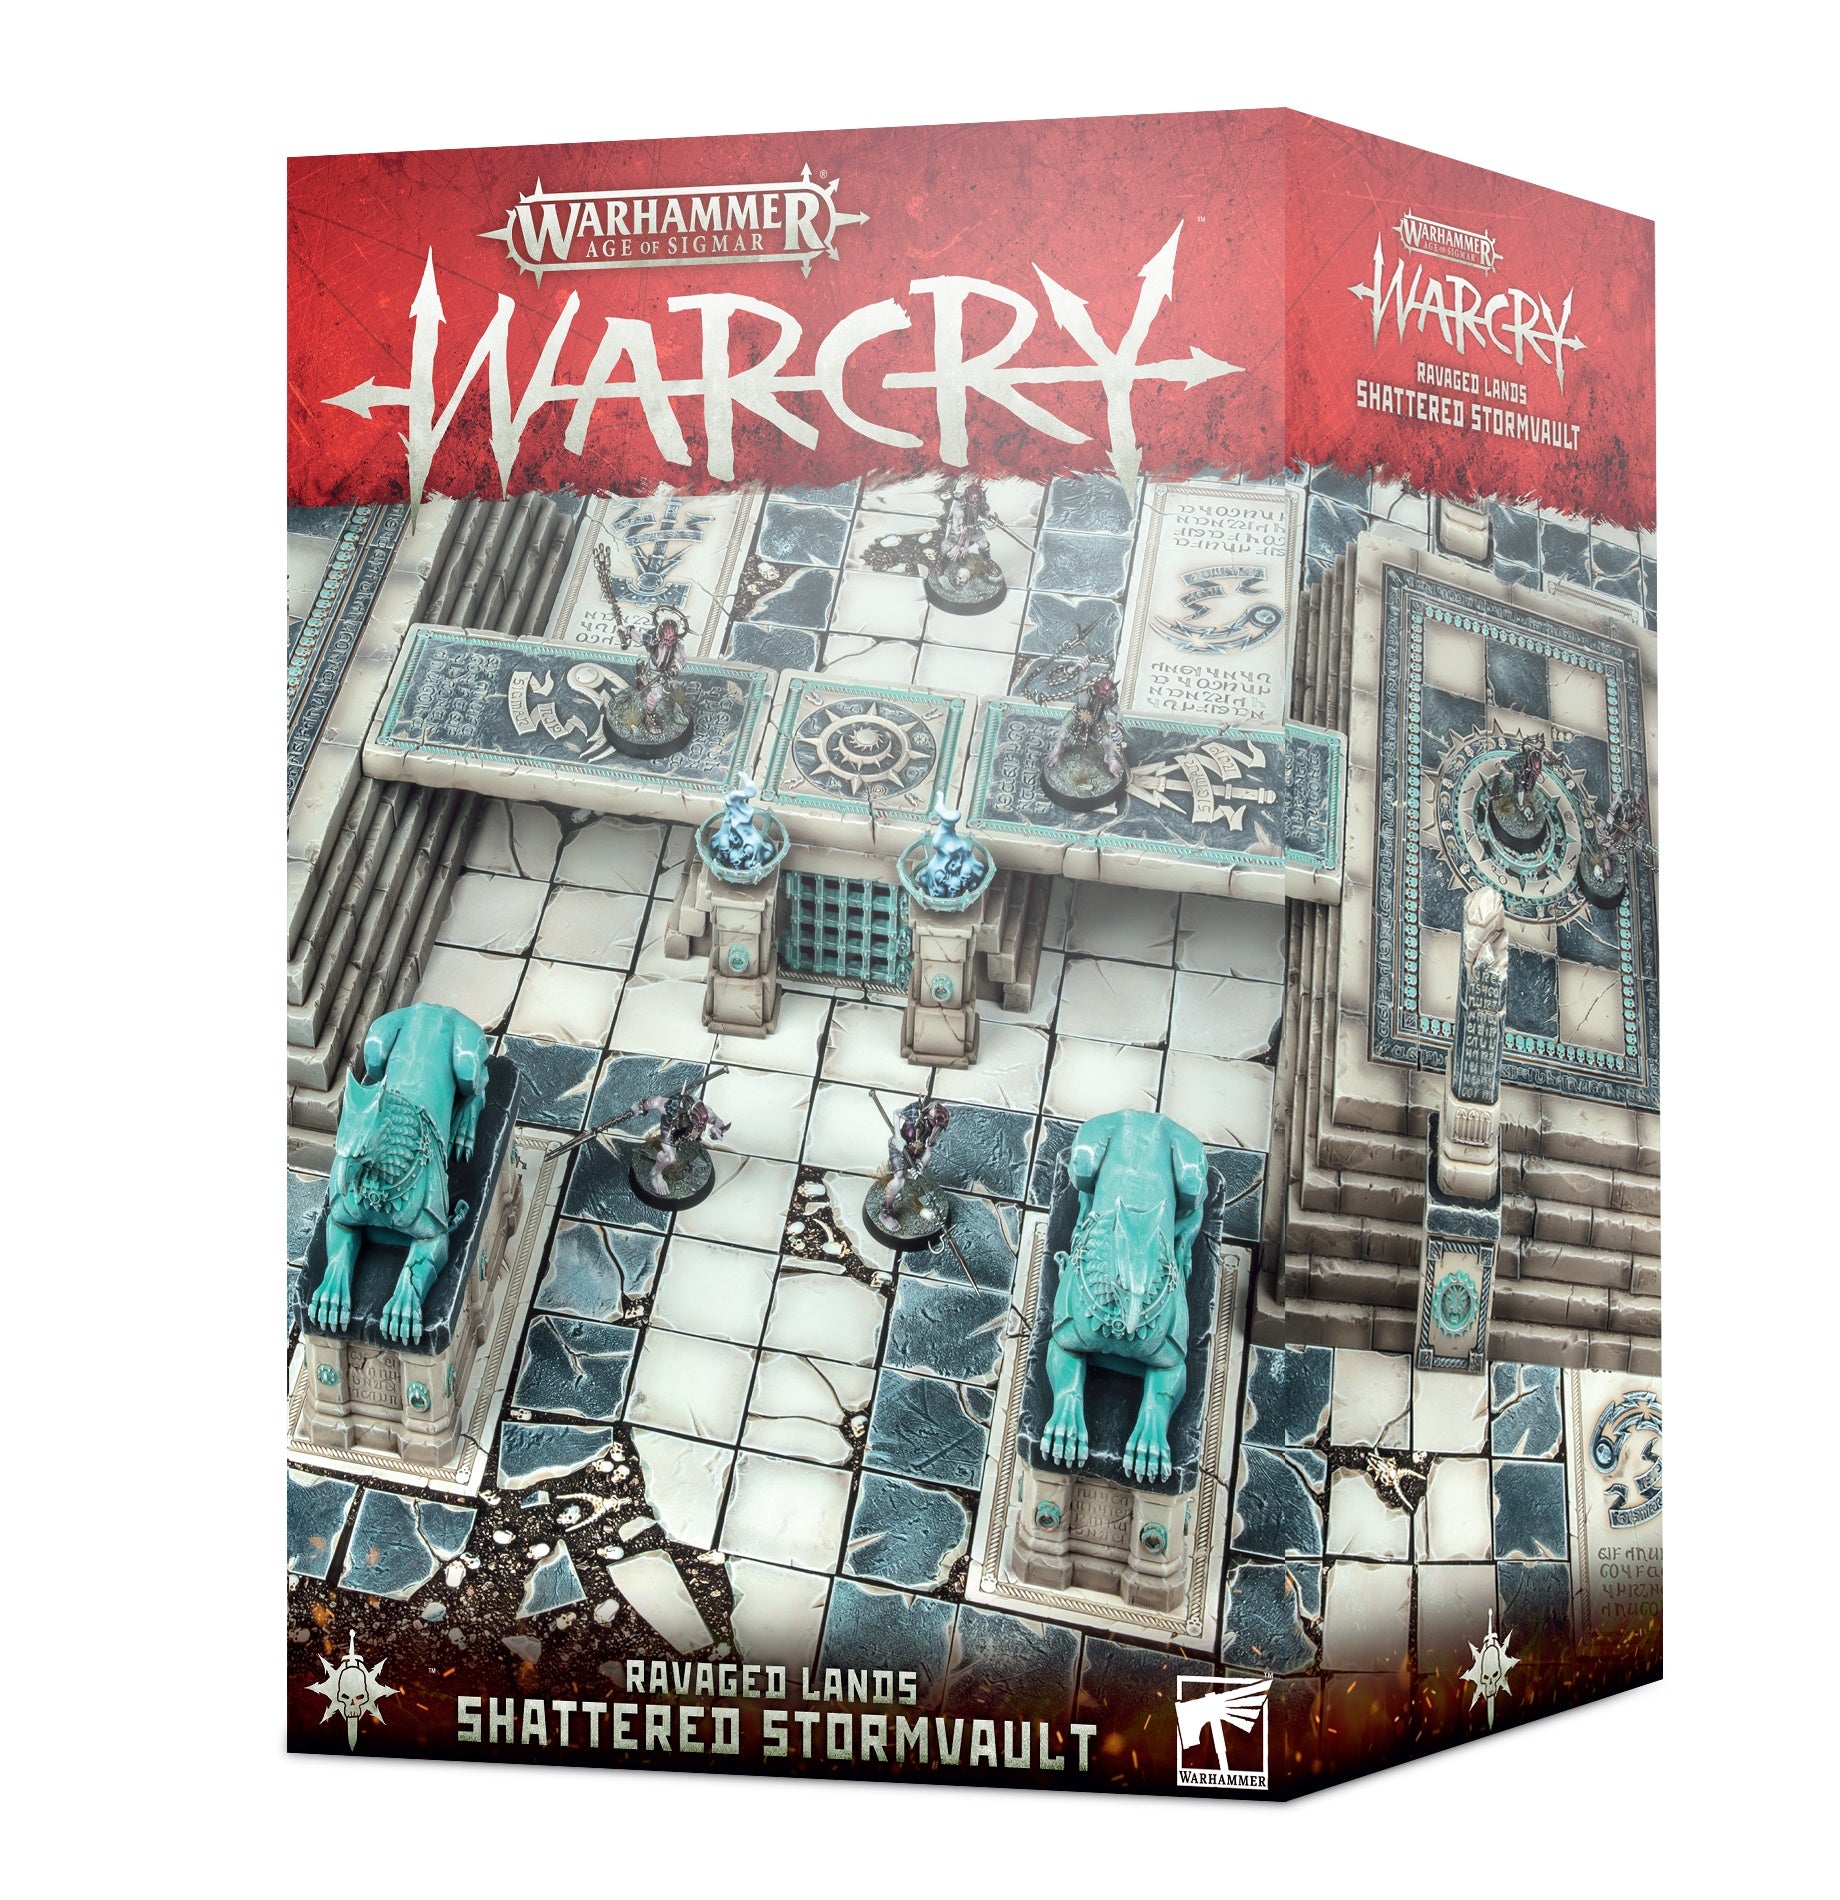 Warcry: Shattered Stormvault